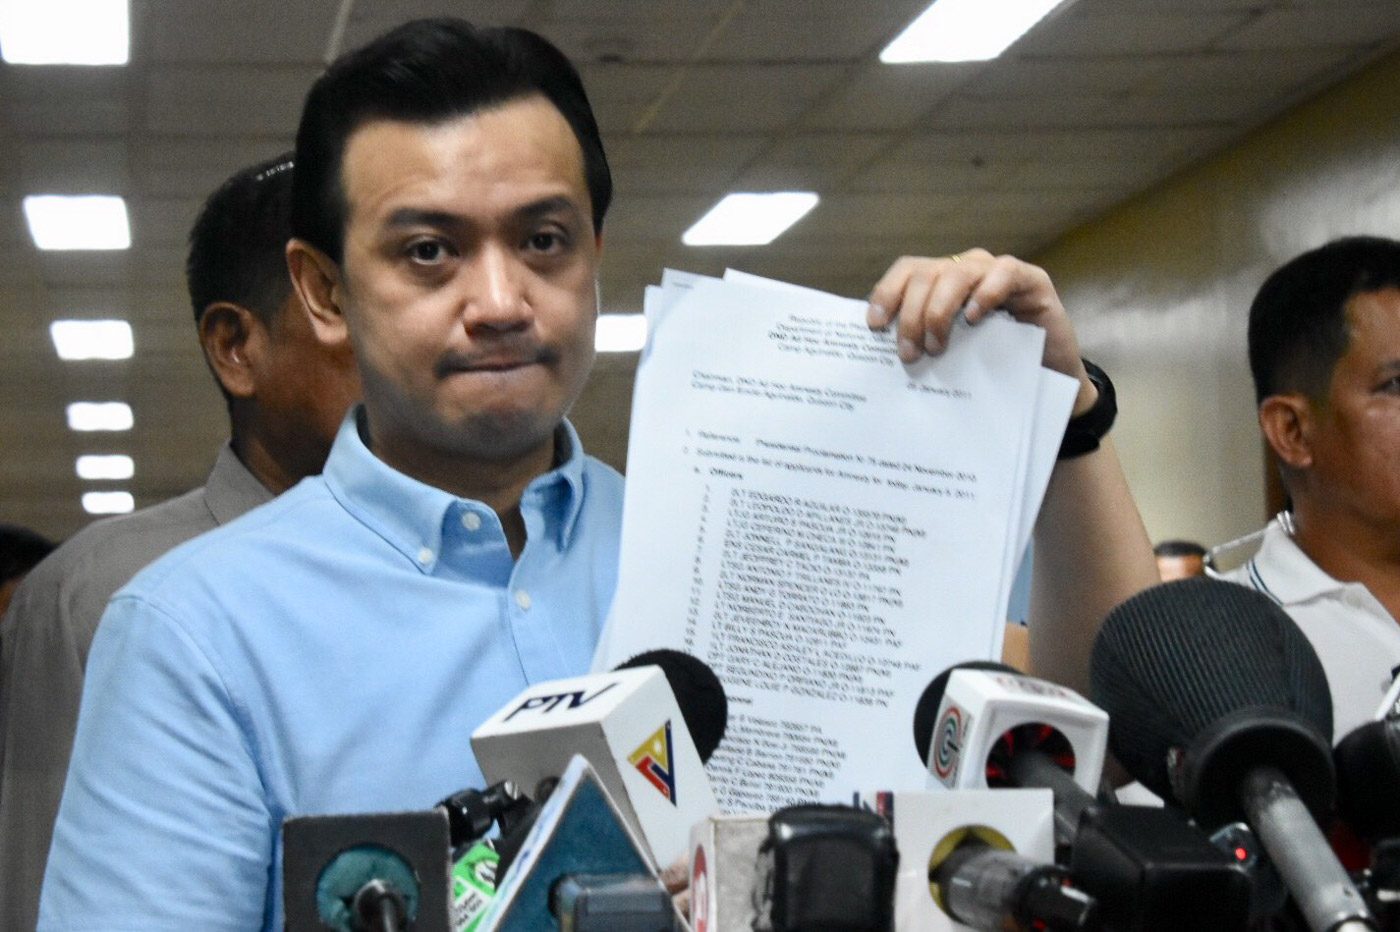 Trillanes vows to run after Guevarra, Calida, DND officials over amnesty issue